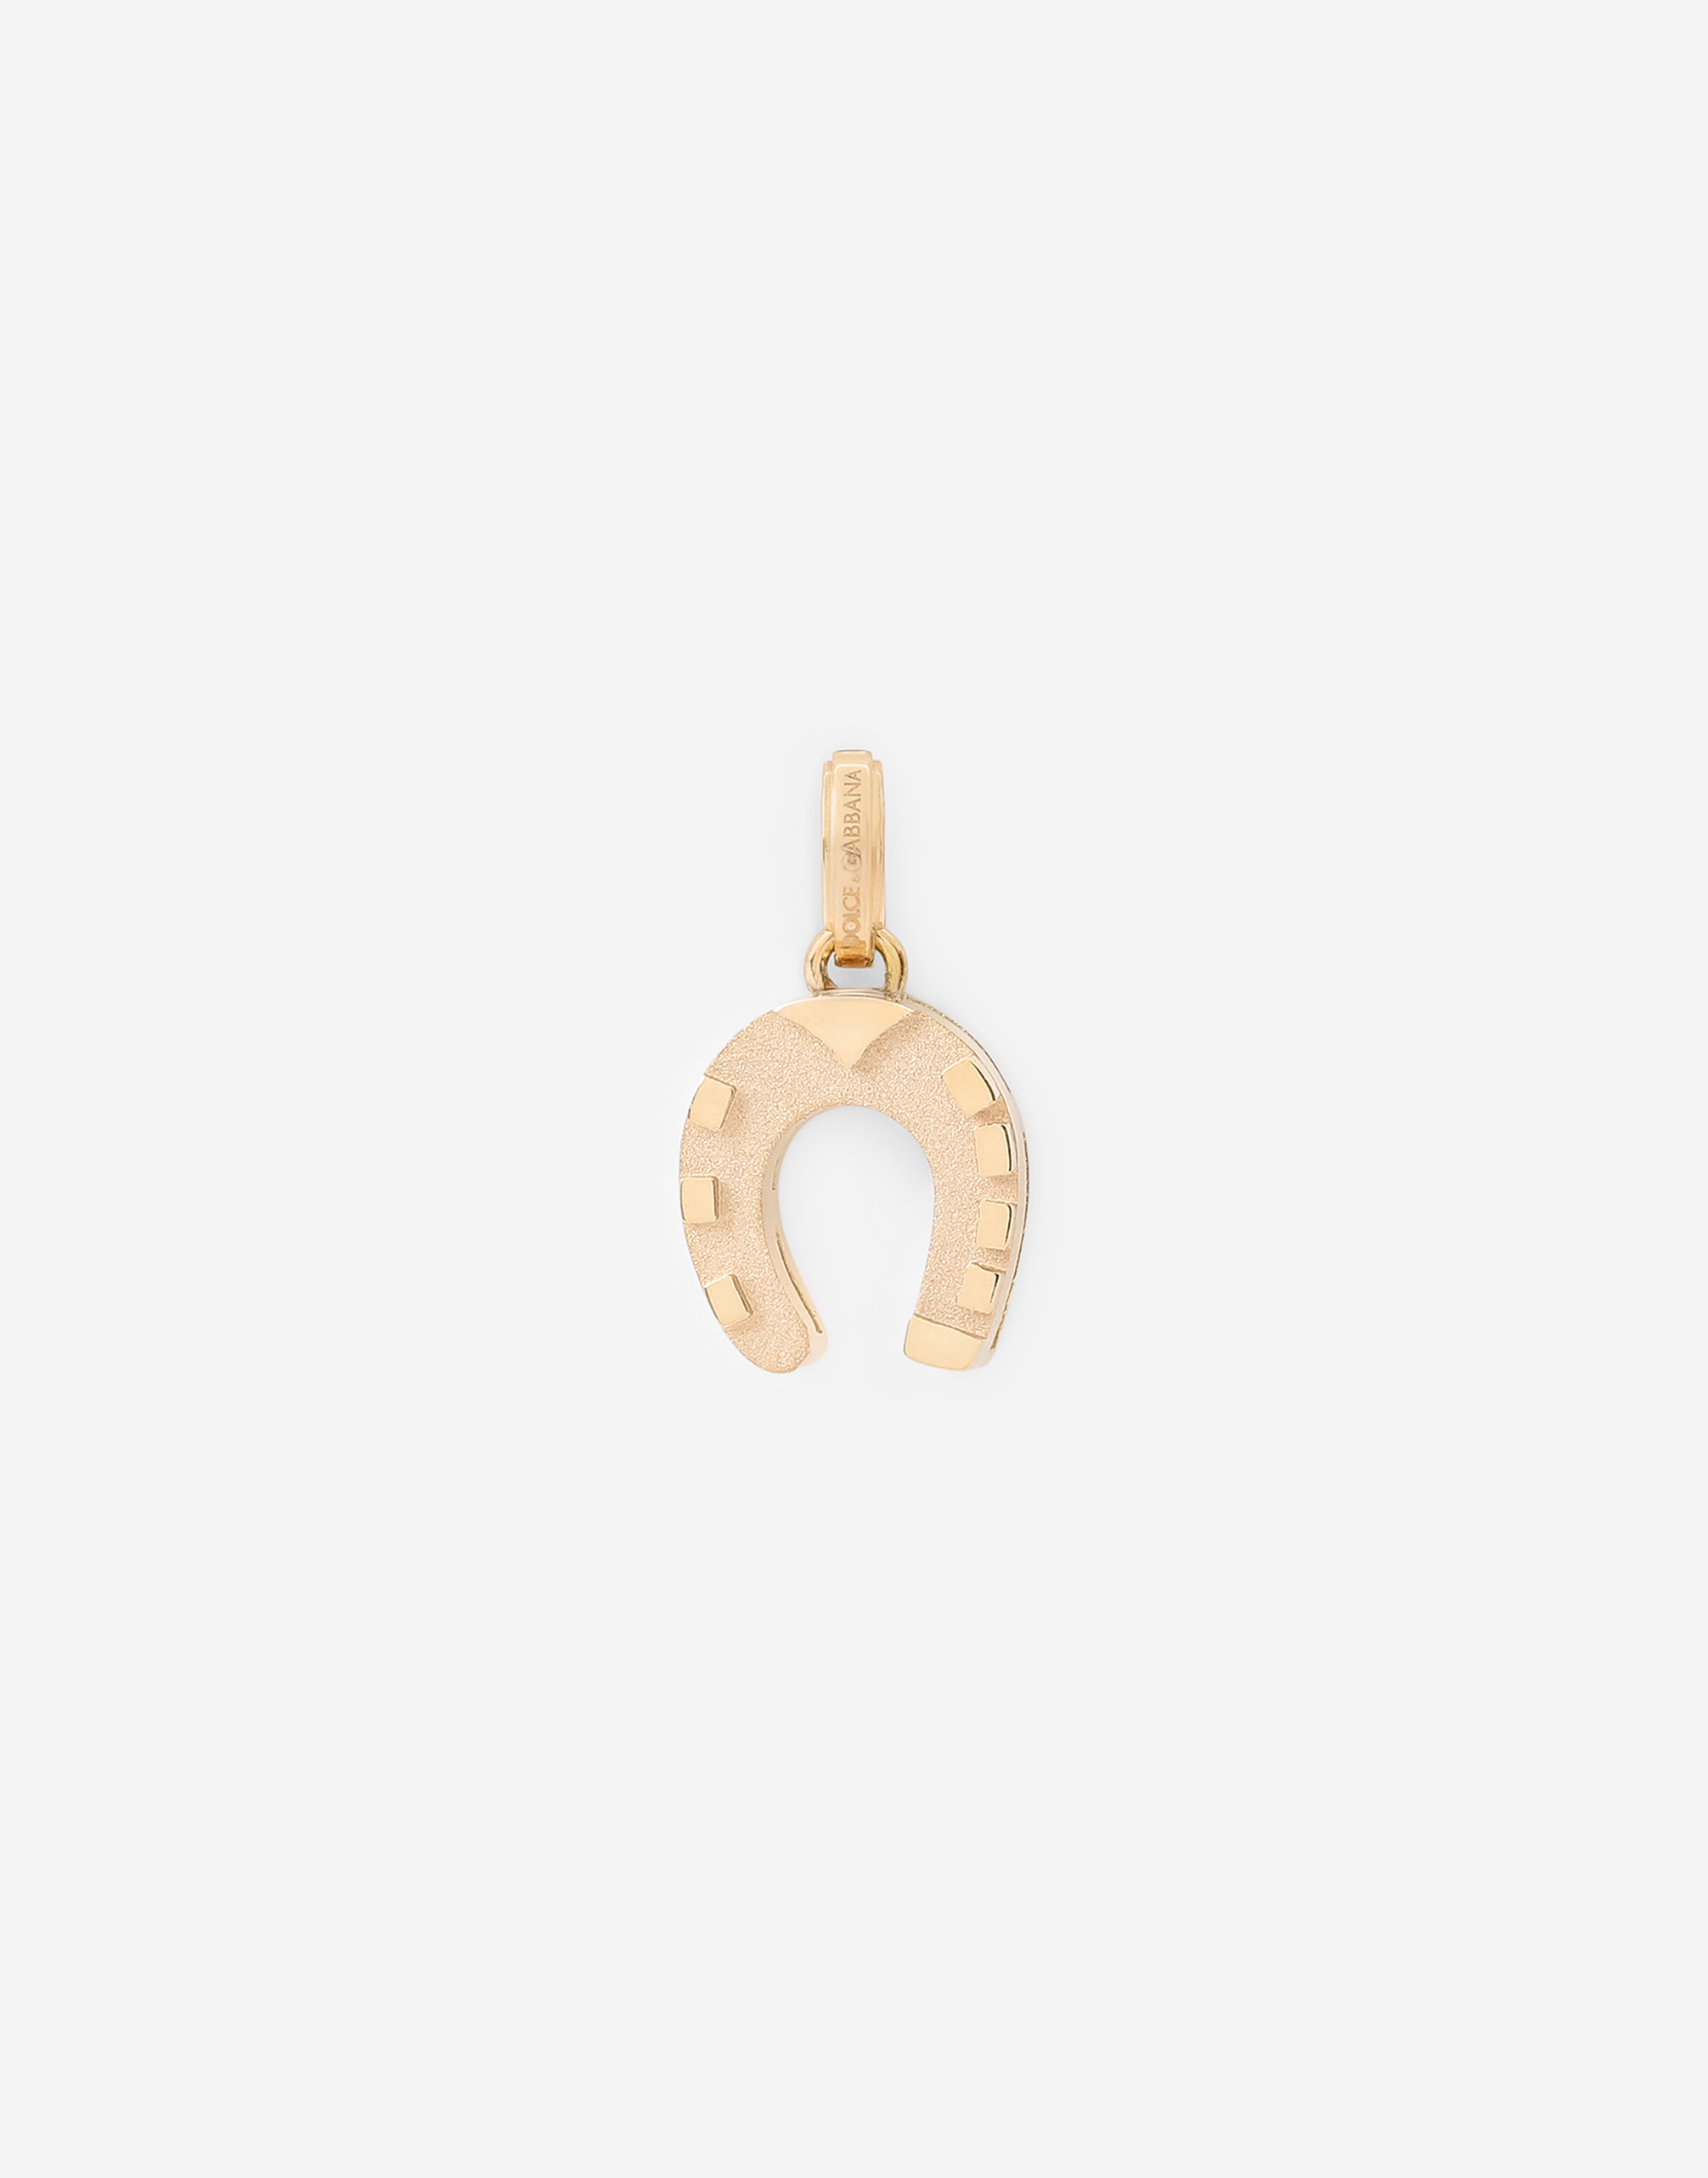 Good Luck yellow gold charm in Yellow gold